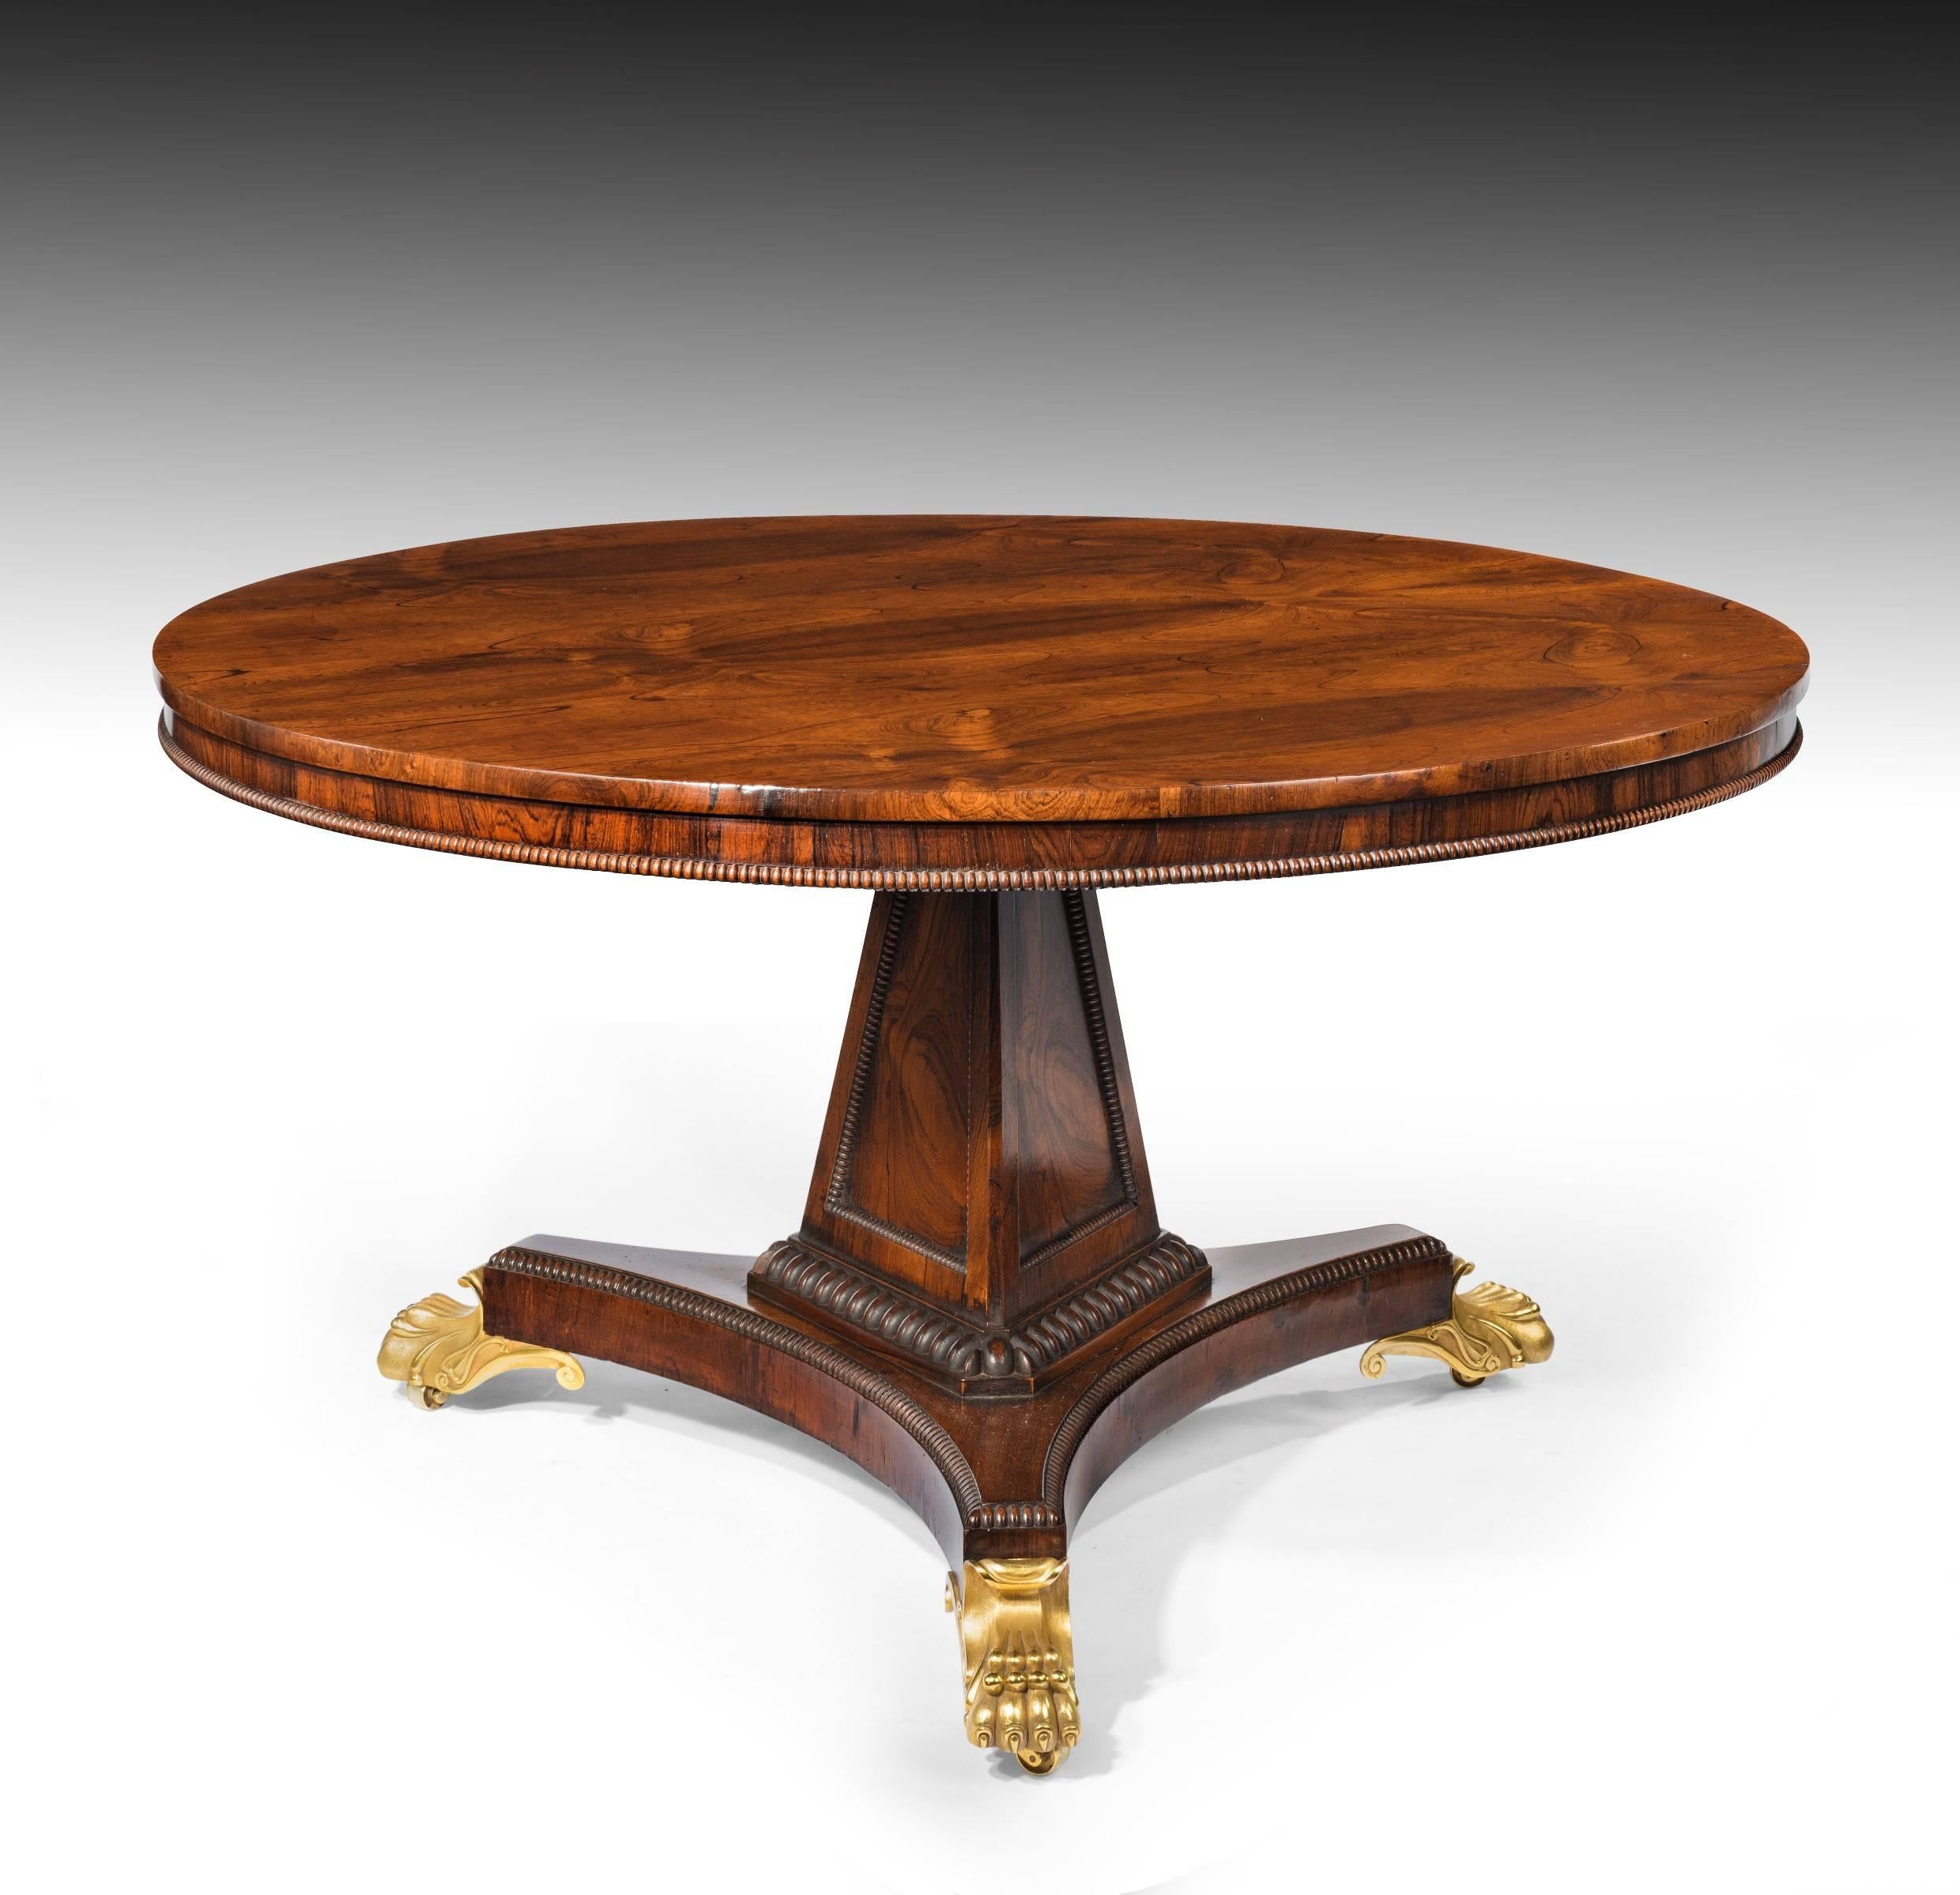 An extremely fine early 19th century breakfast table in the manner of Gillows of Lancaster. 
This well proportioned and very fine rosewood table has been constructed to the highest of standards dating to circa 1820 believed to made by Gillows of